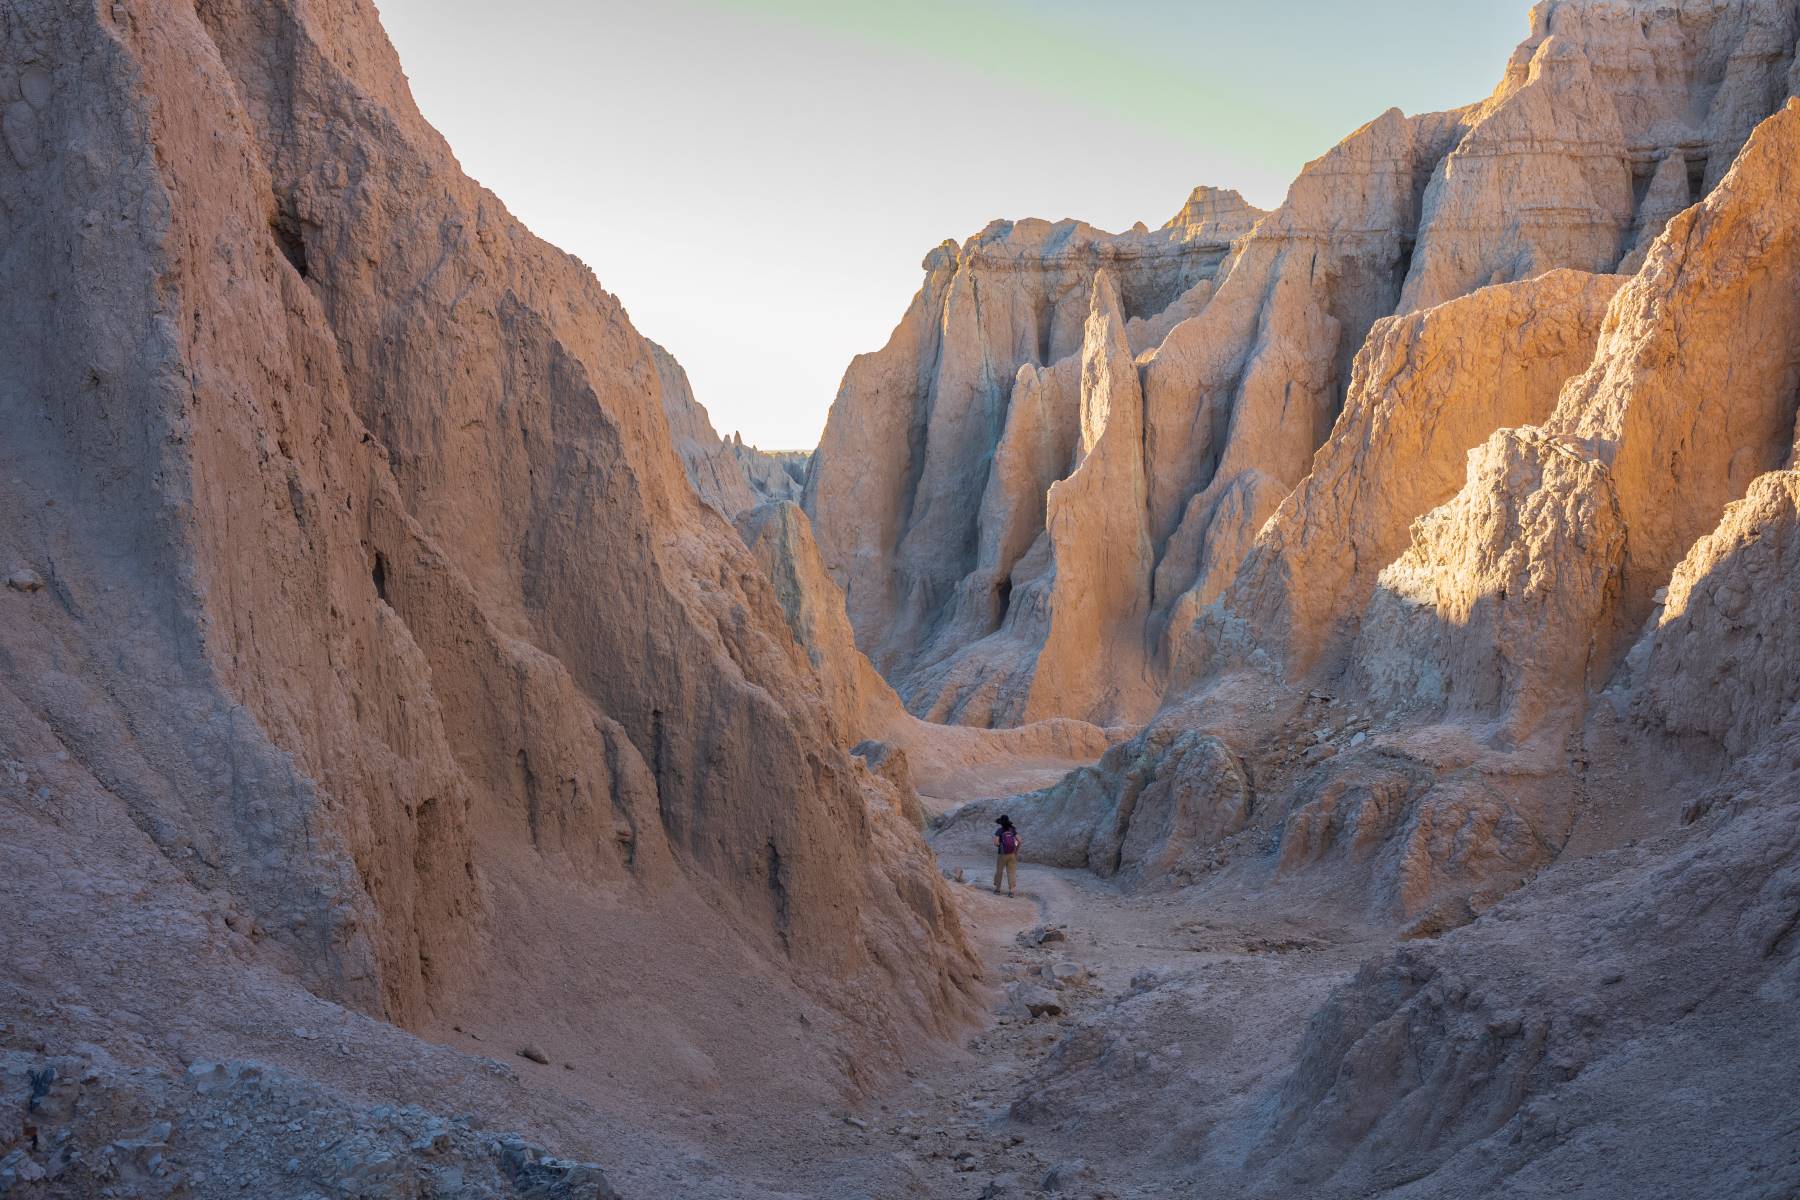 The Notch Trail in Badlands National Park offers some of the best hiking in the midwest